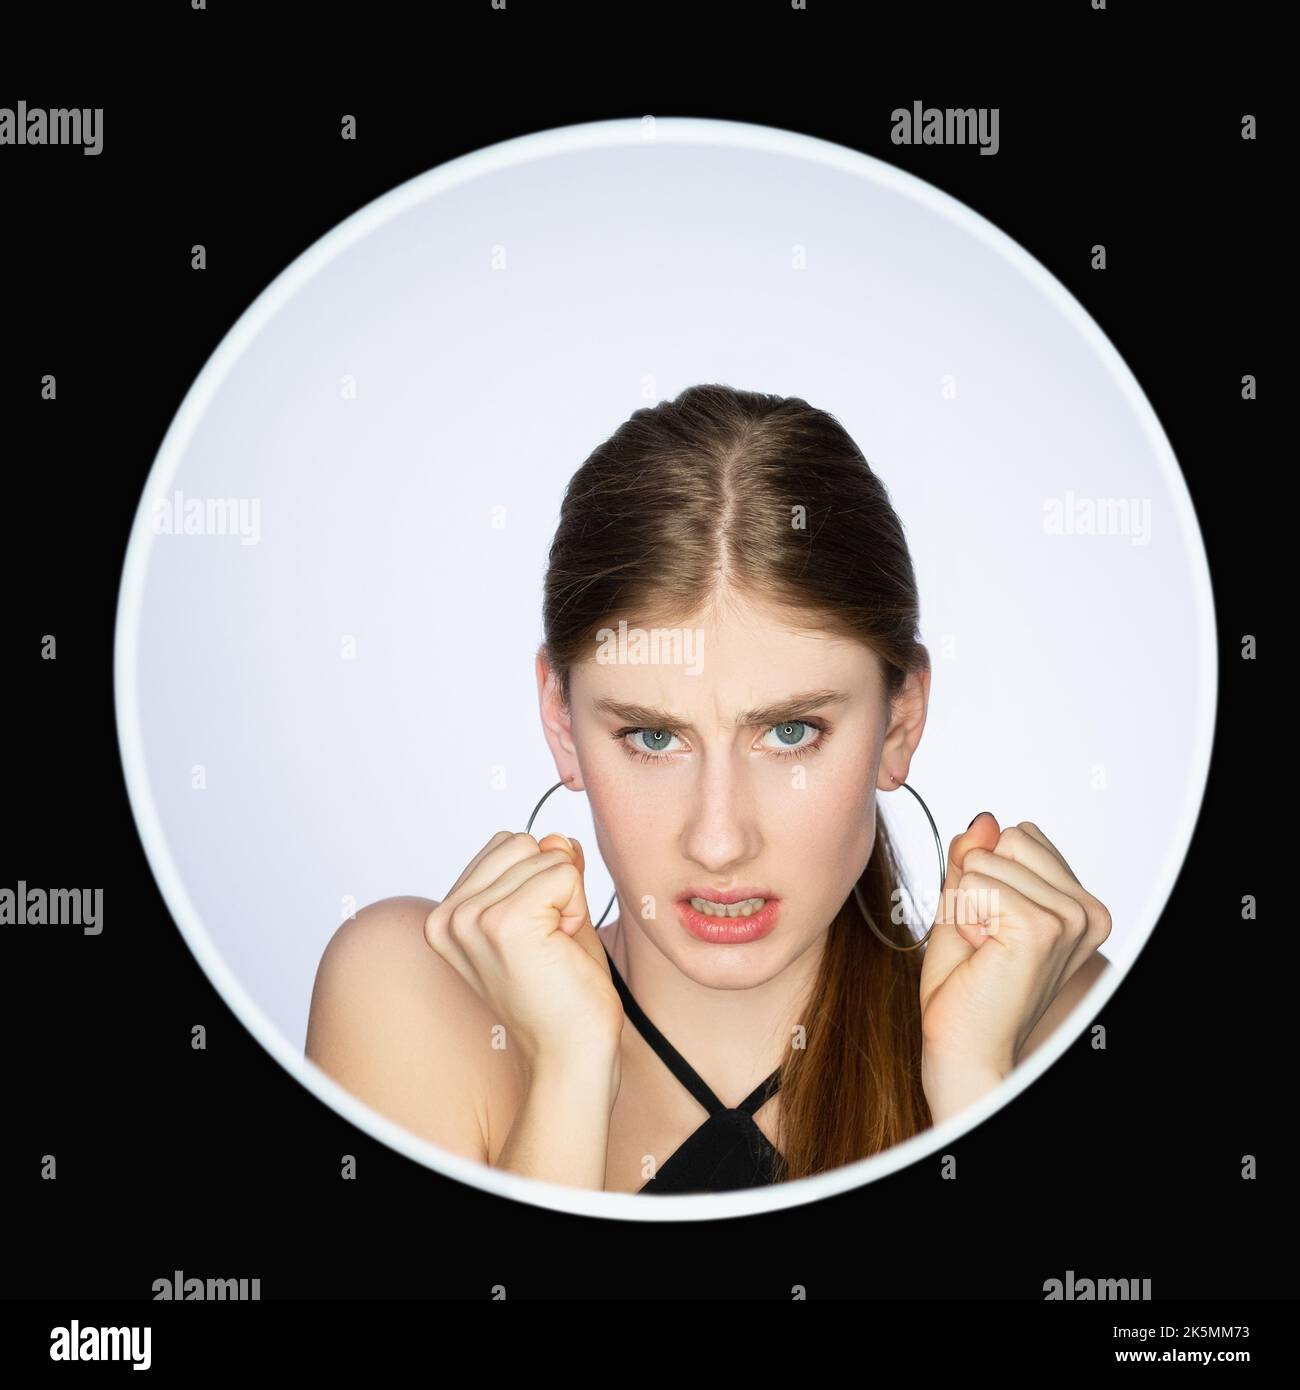 Angry woman. Hate feeling. Anxiety frustration. Headshot portrait of furious annoyed mad girl face isolated on neutral background in circle avatar fra Stock Photo